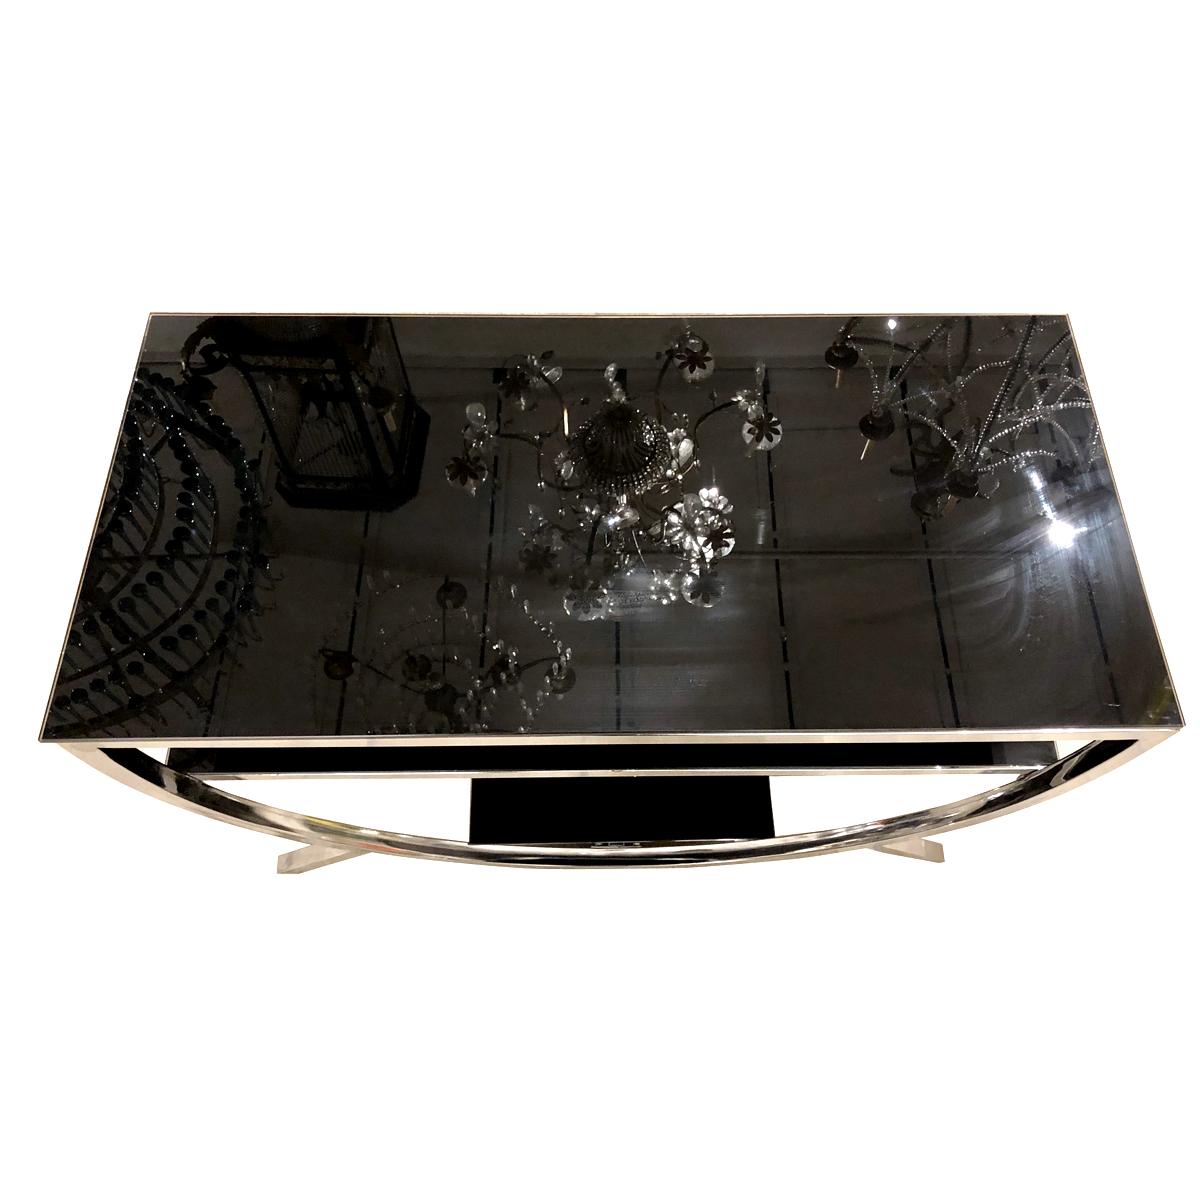 Pair of 1960's Italian nickel-plated consoles with black glass shelves. Sold as pair.

Measurements:
Height 24